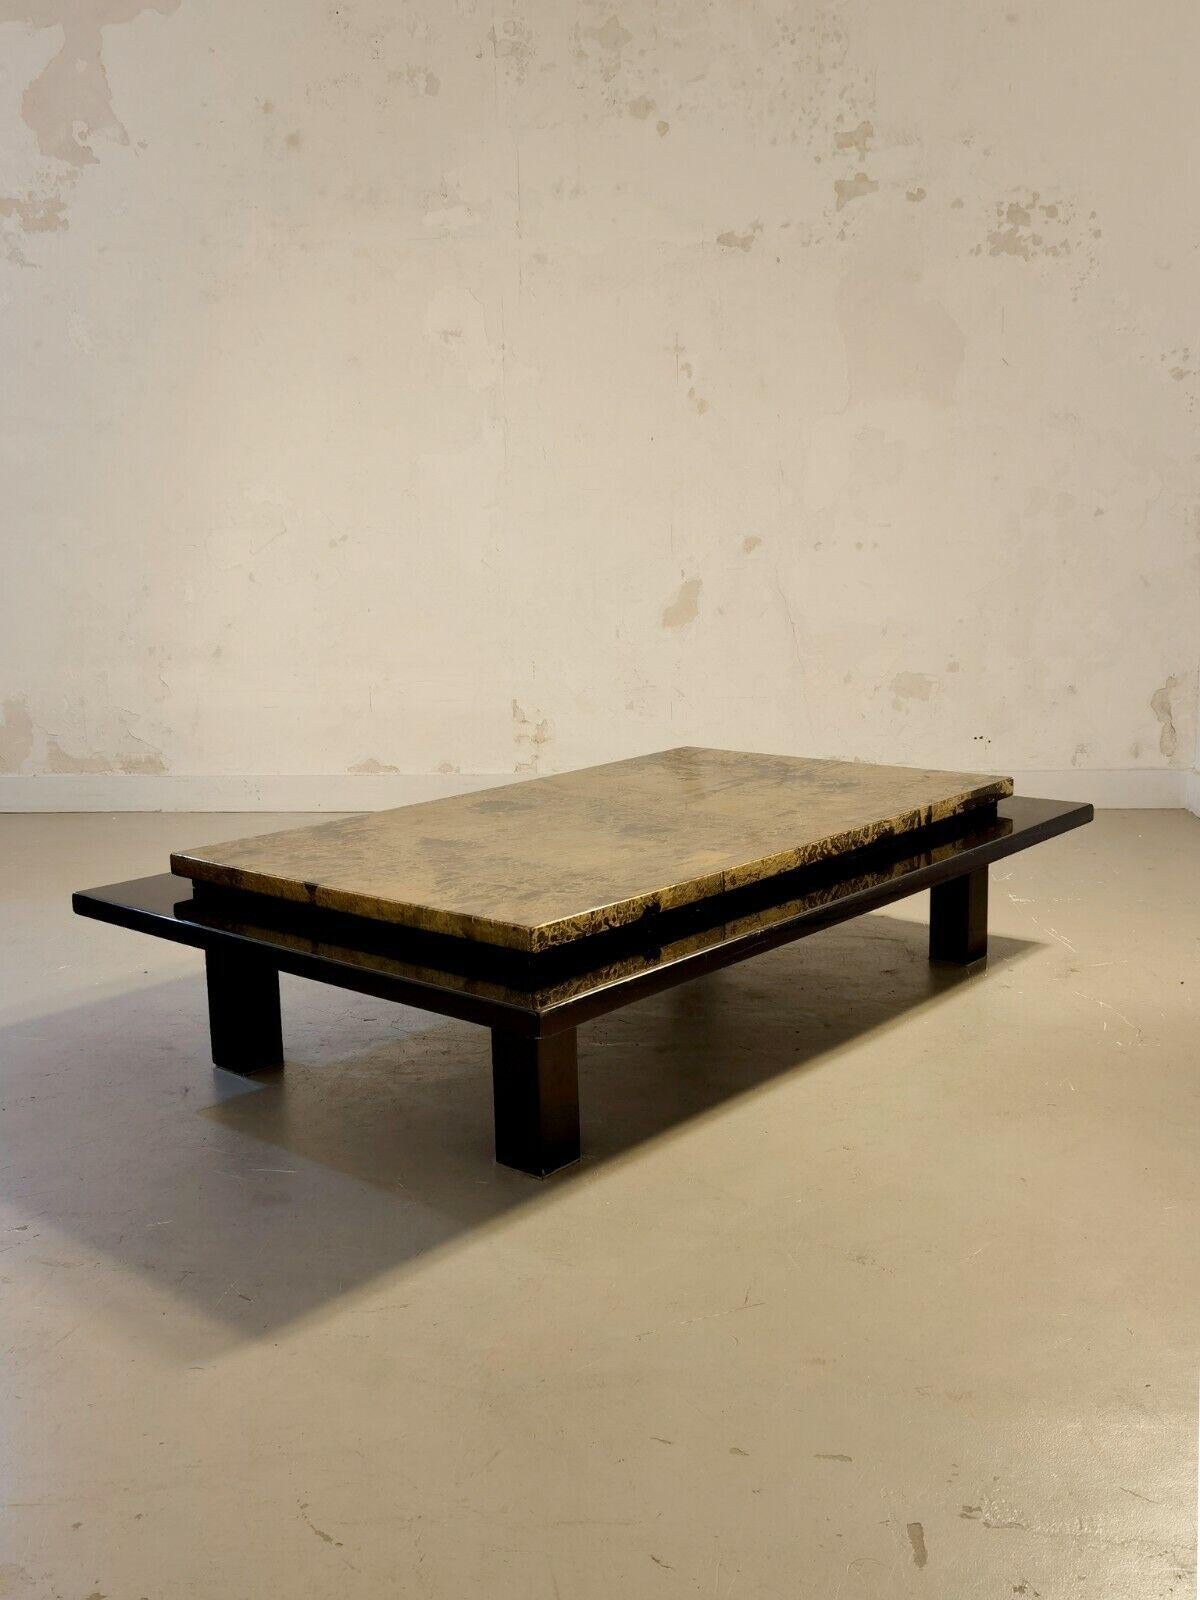 Post-Modern A Lacquered JAPANESE Style COFFEE TABLE by ROCHE & BOBOIS ALDO TURA France 1970 For Sale